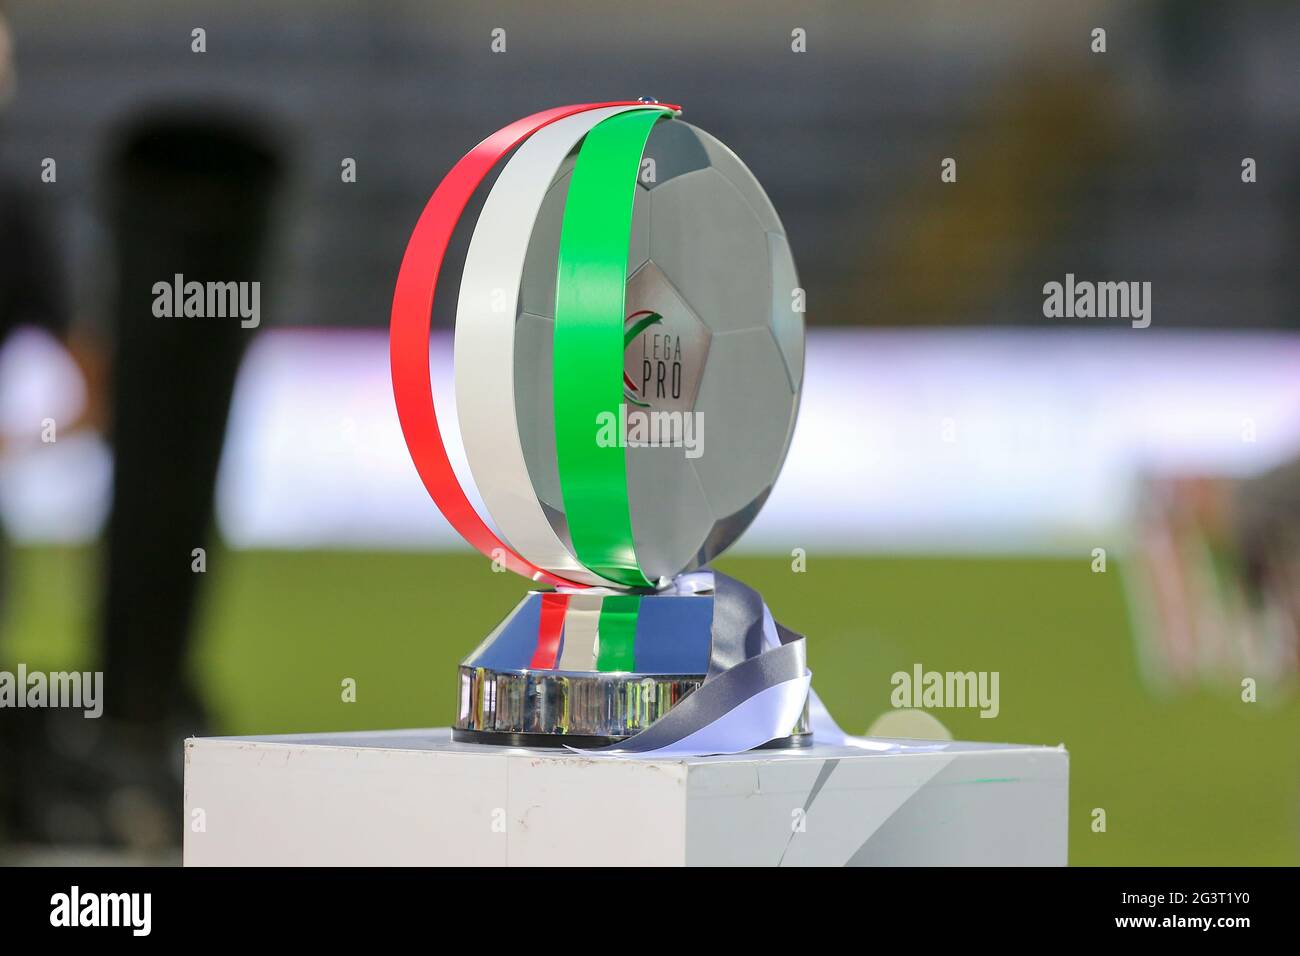 Alessandria, Italy. 17th June, 2021. The Lega Pro trophy after the Lega Pro  Playoff final match between US Alessandria and Padova Calcio at Giuseppe  Moccagatta stadium. Credit: Massimiliano Ferraro/Medialys Images/Alamy Live  News